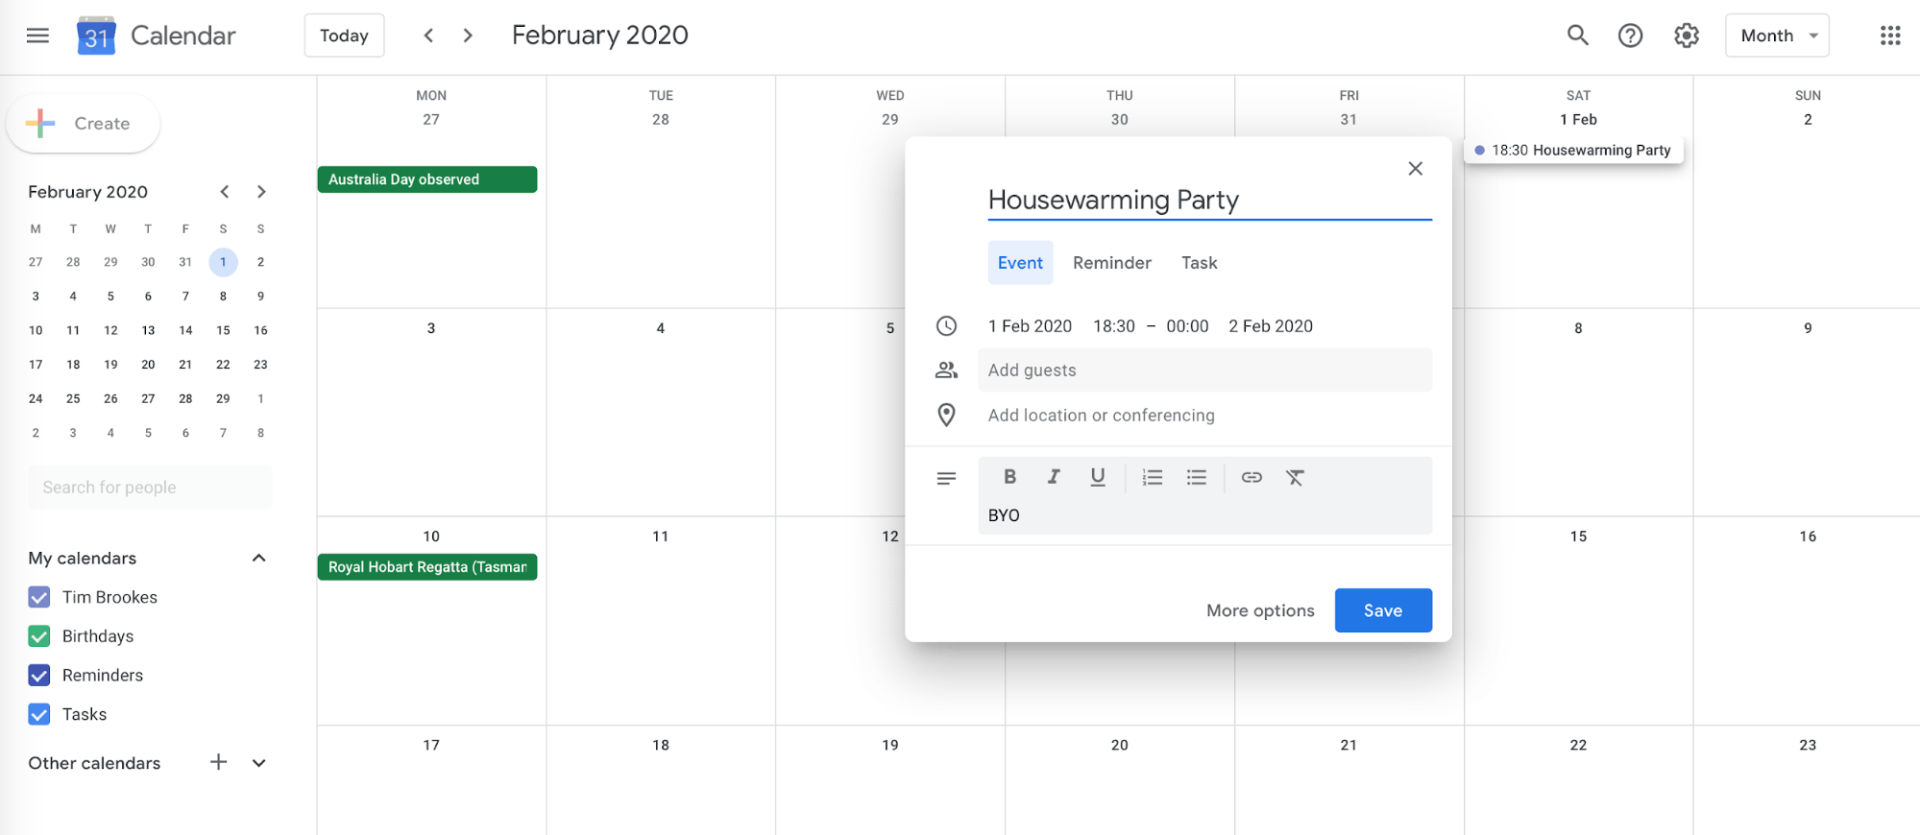 How To Download A Calendar App And Optimize Schedules